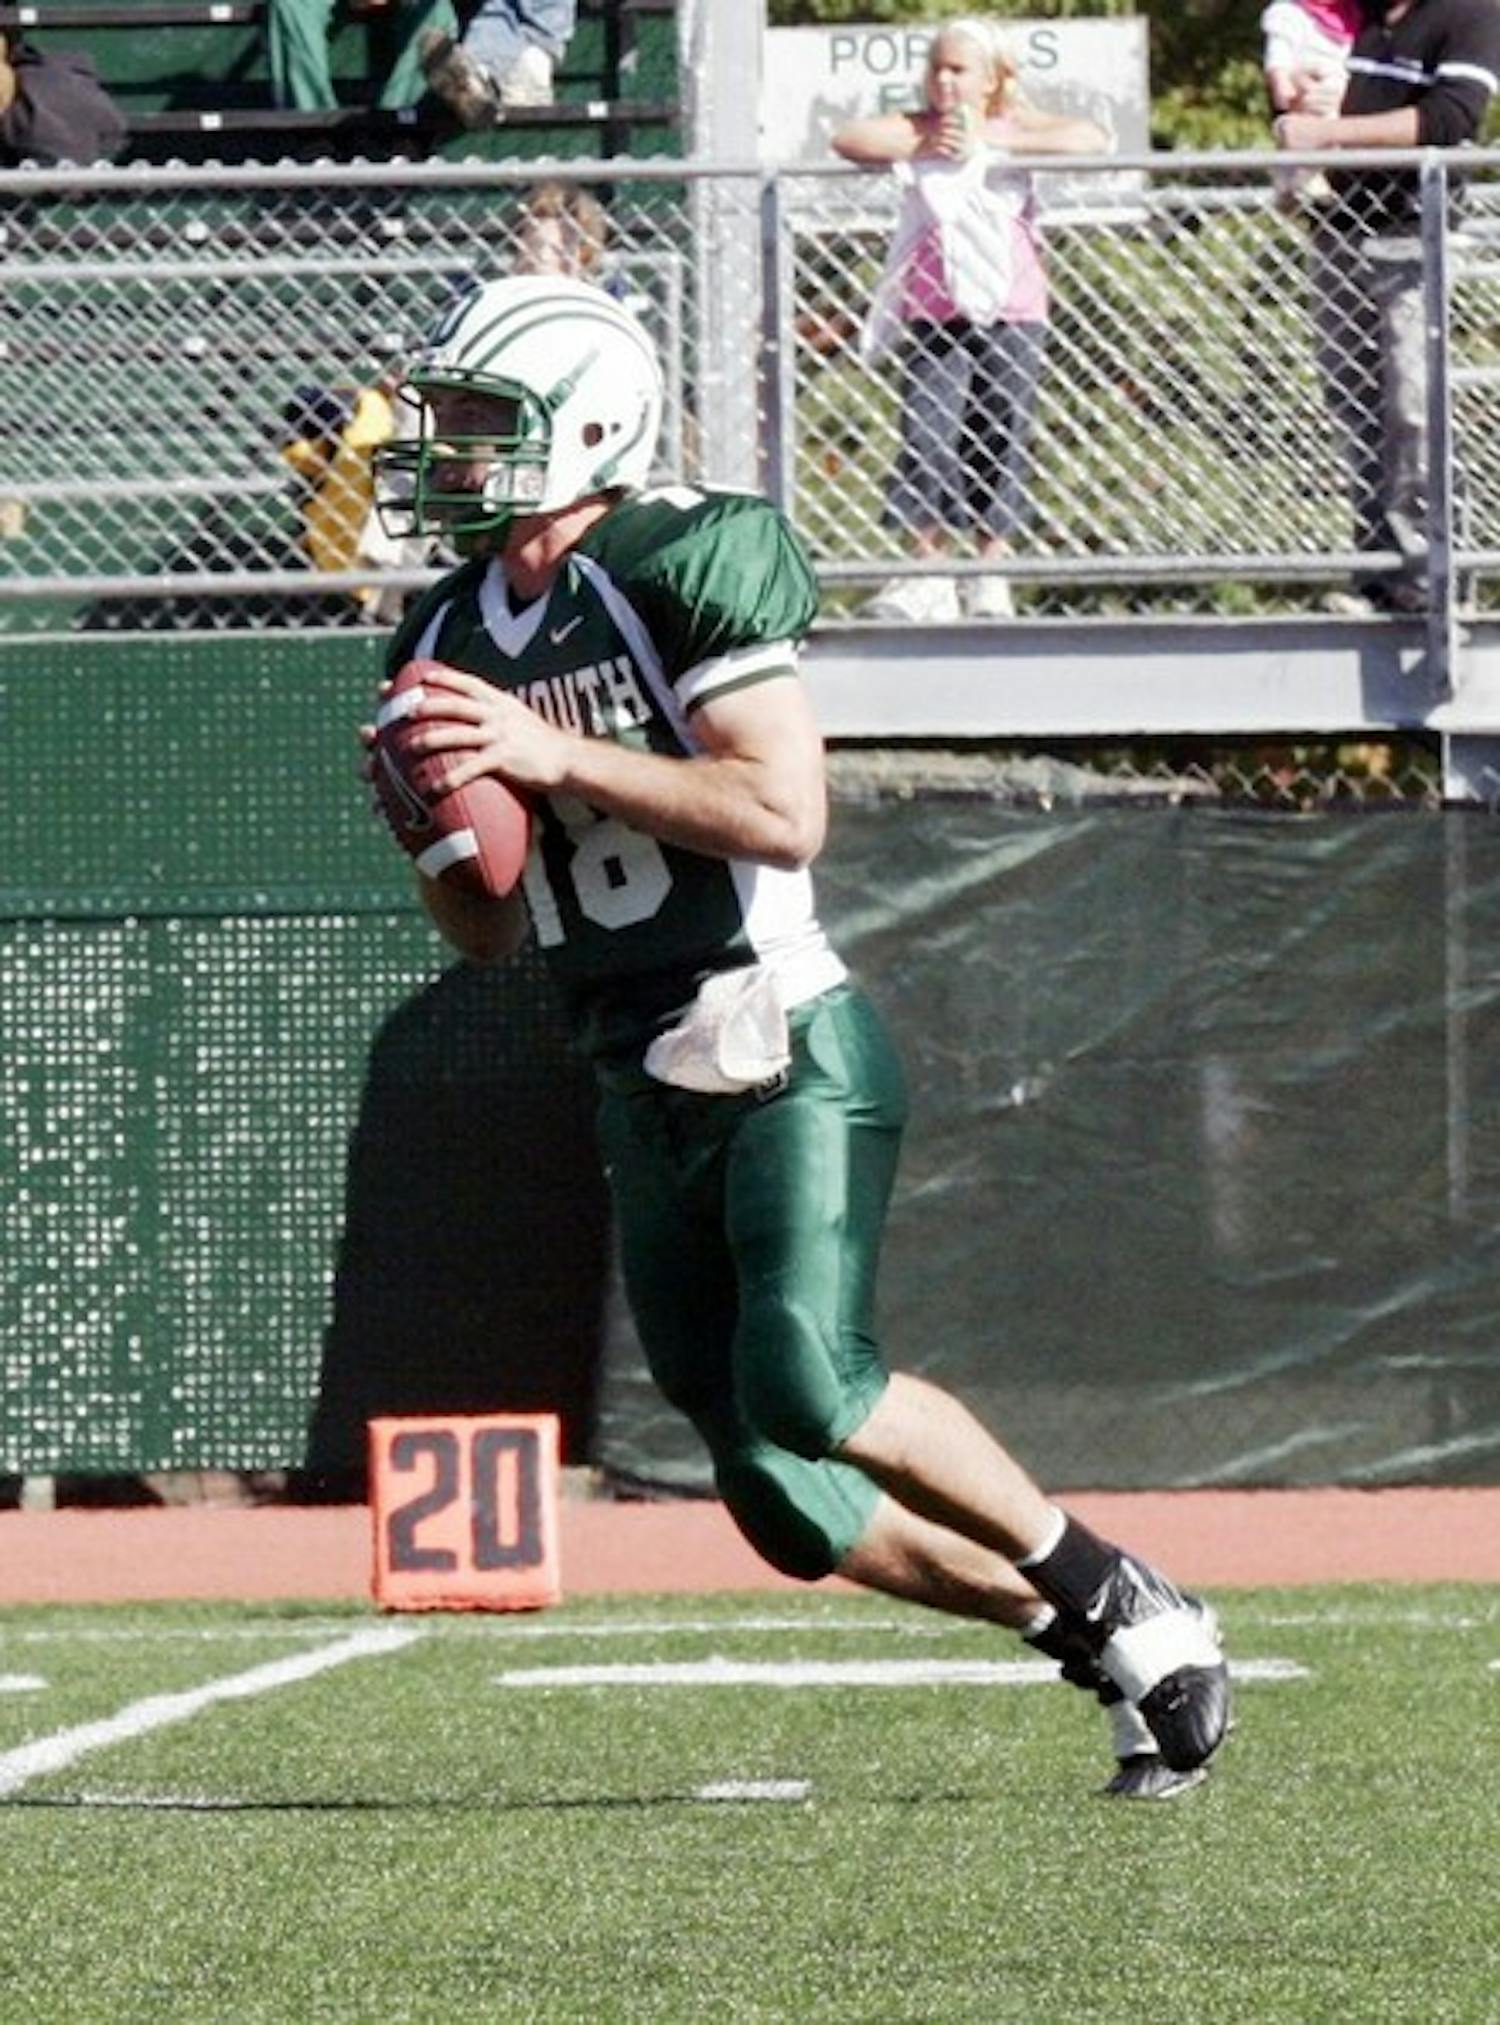 Mike Fritz '07 will look to continue his strong play versus Harvard Saturday.